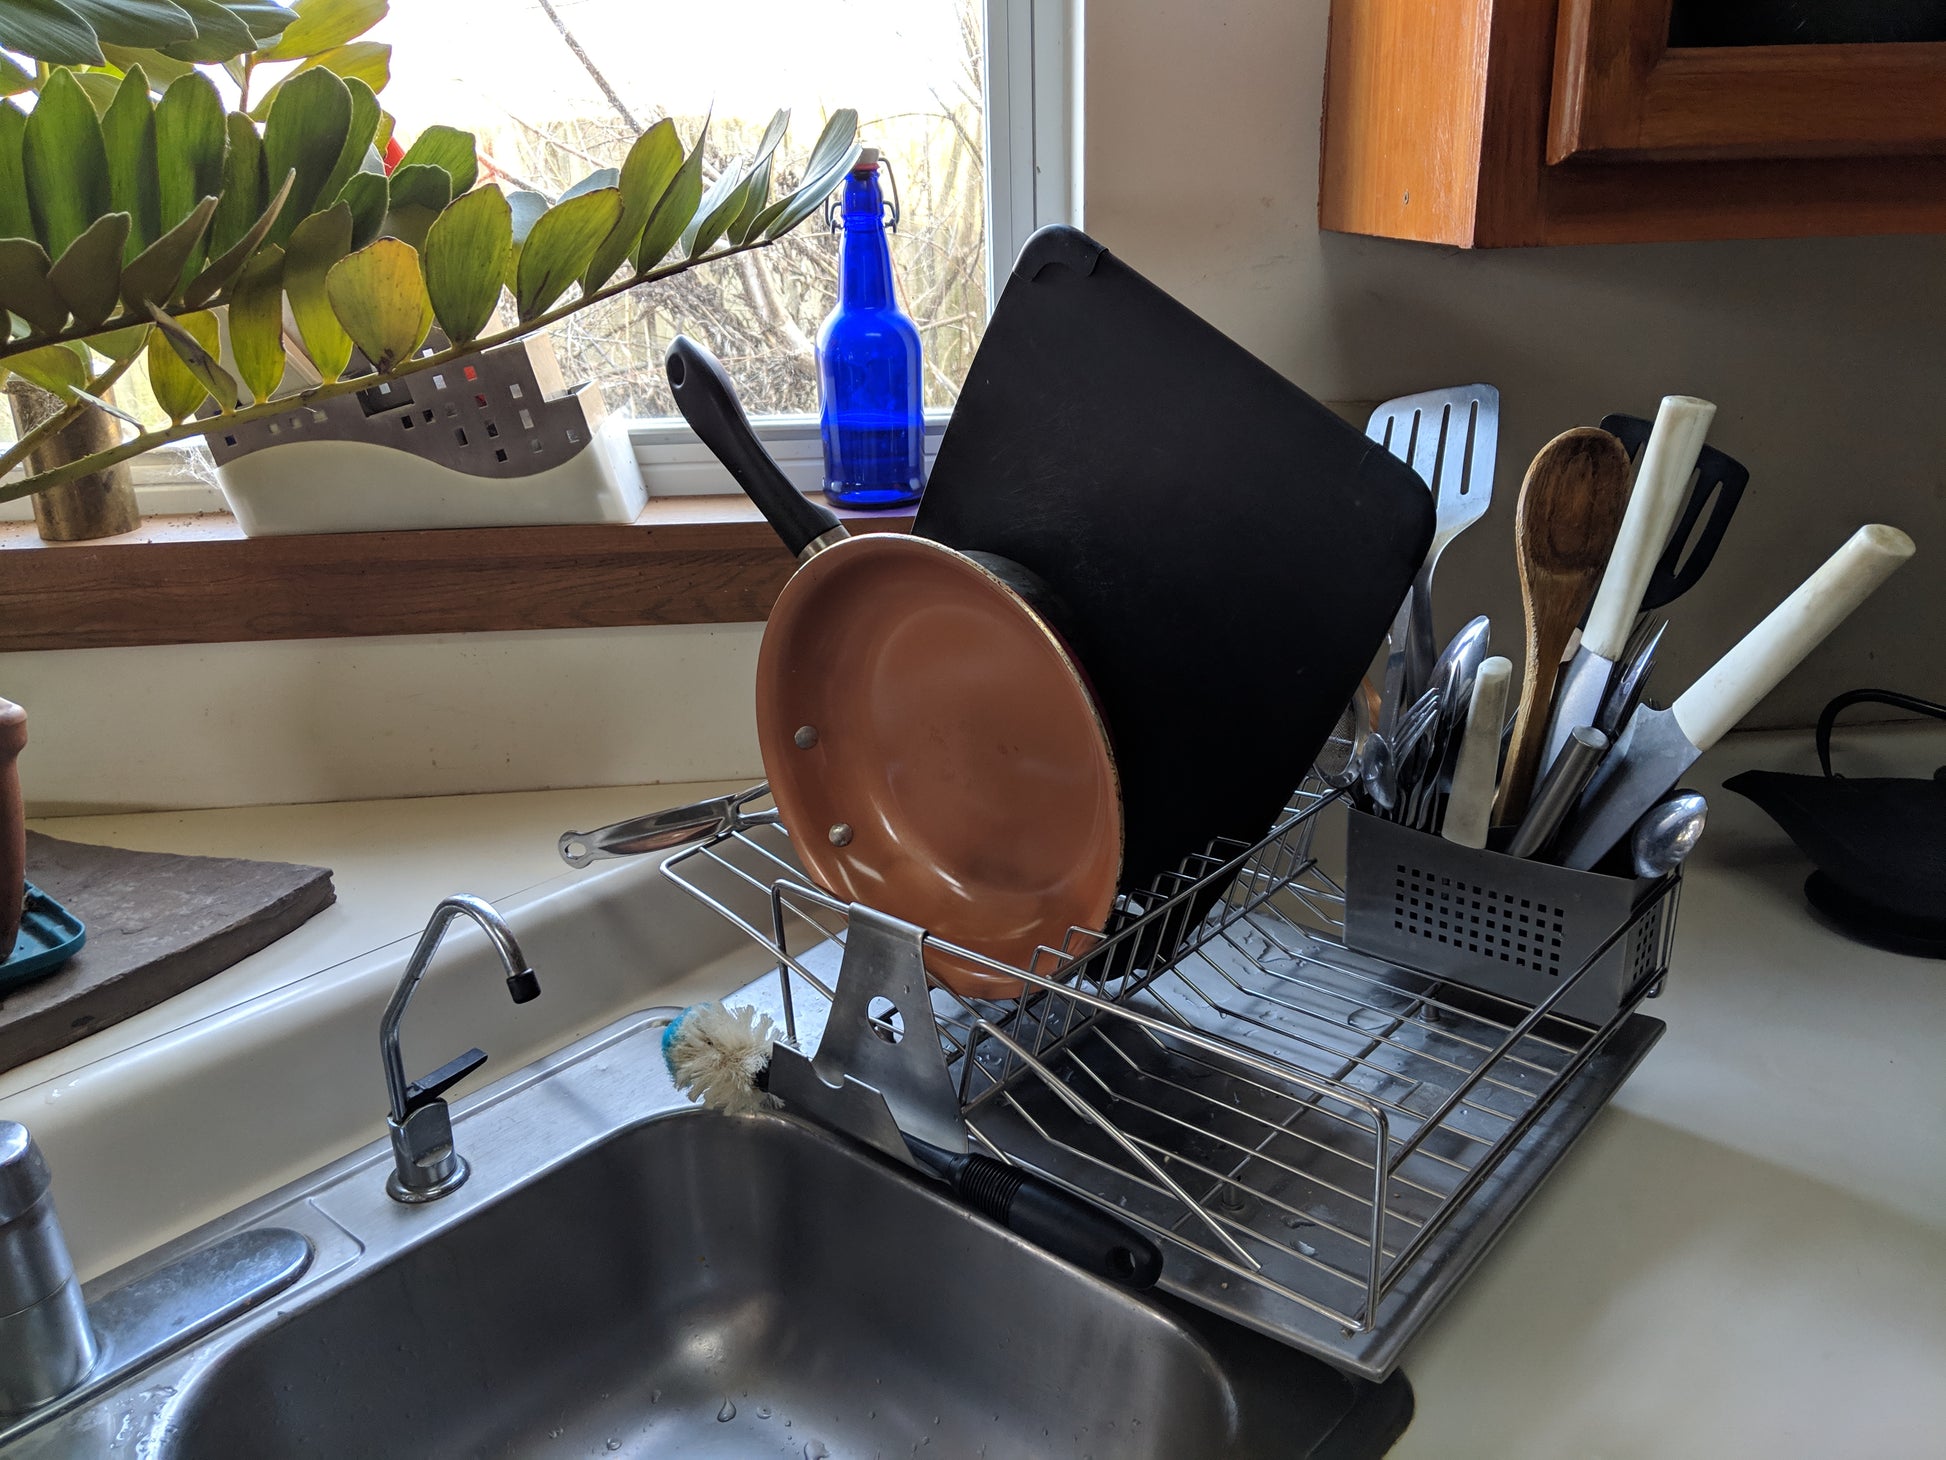 Zojila.com : Rohan Dish drainer, use cutting boards to prop unstable items upright